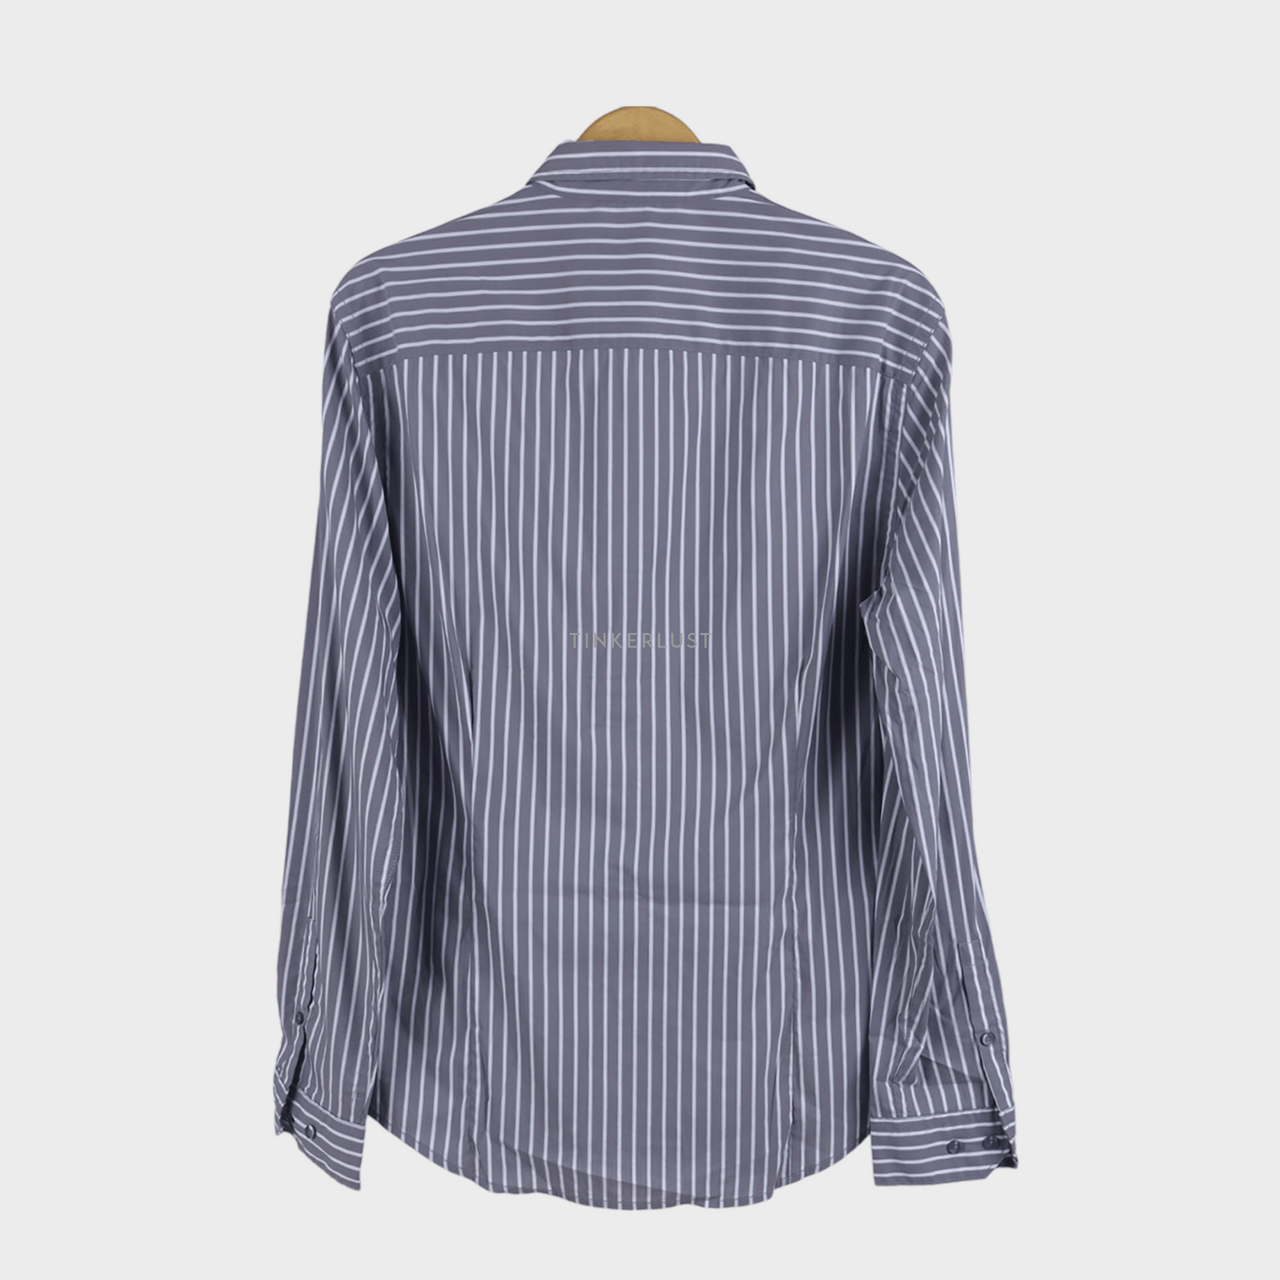 7 For All Mankind Grey & White Stripes Shirt